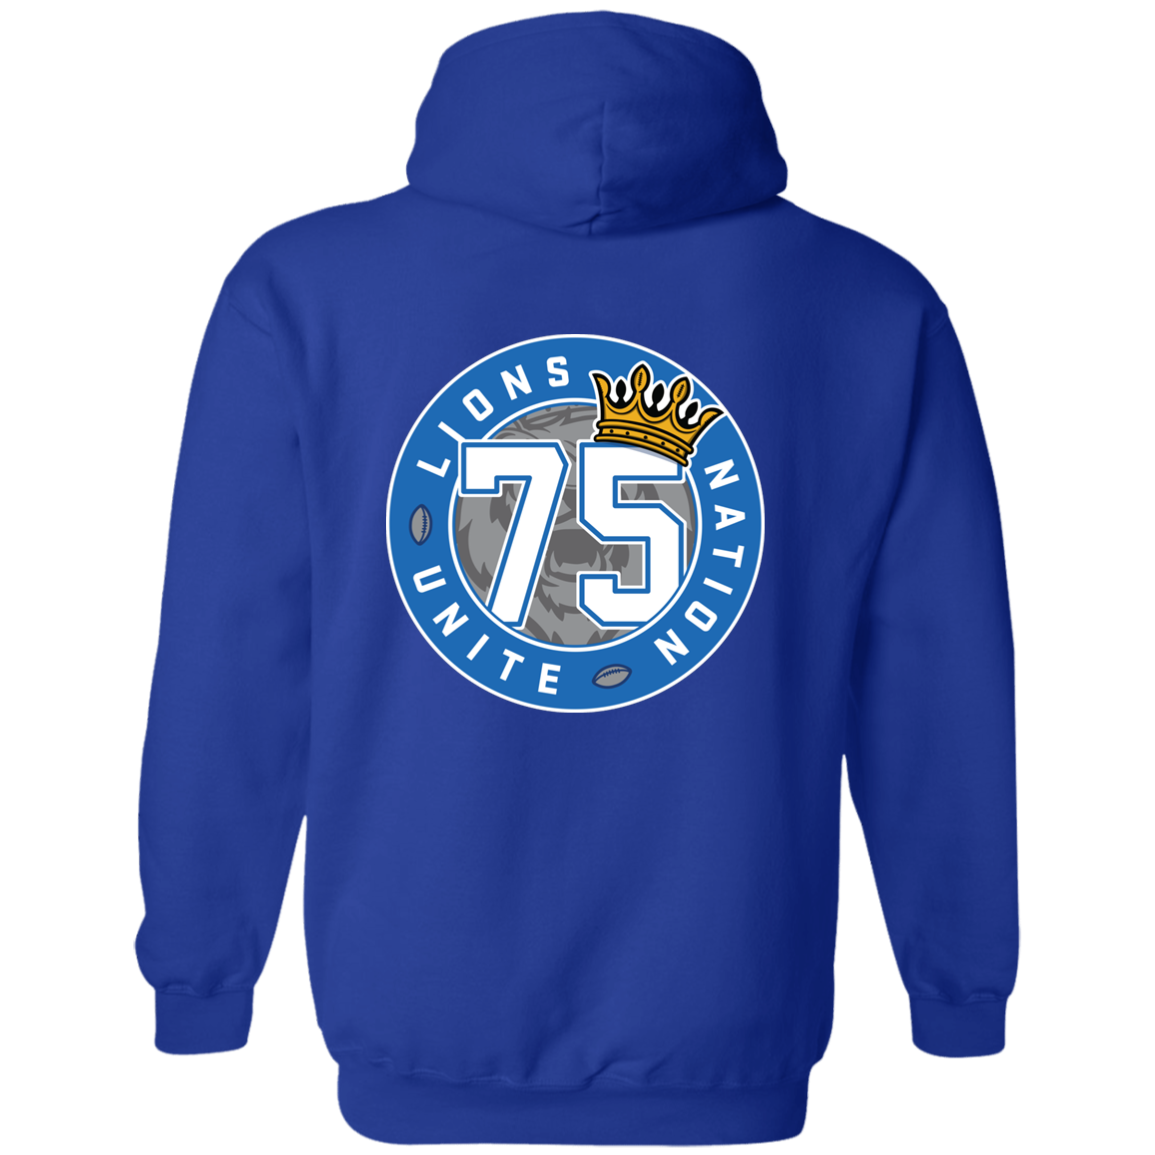 No. 75 - G185 Pullover Hoodie